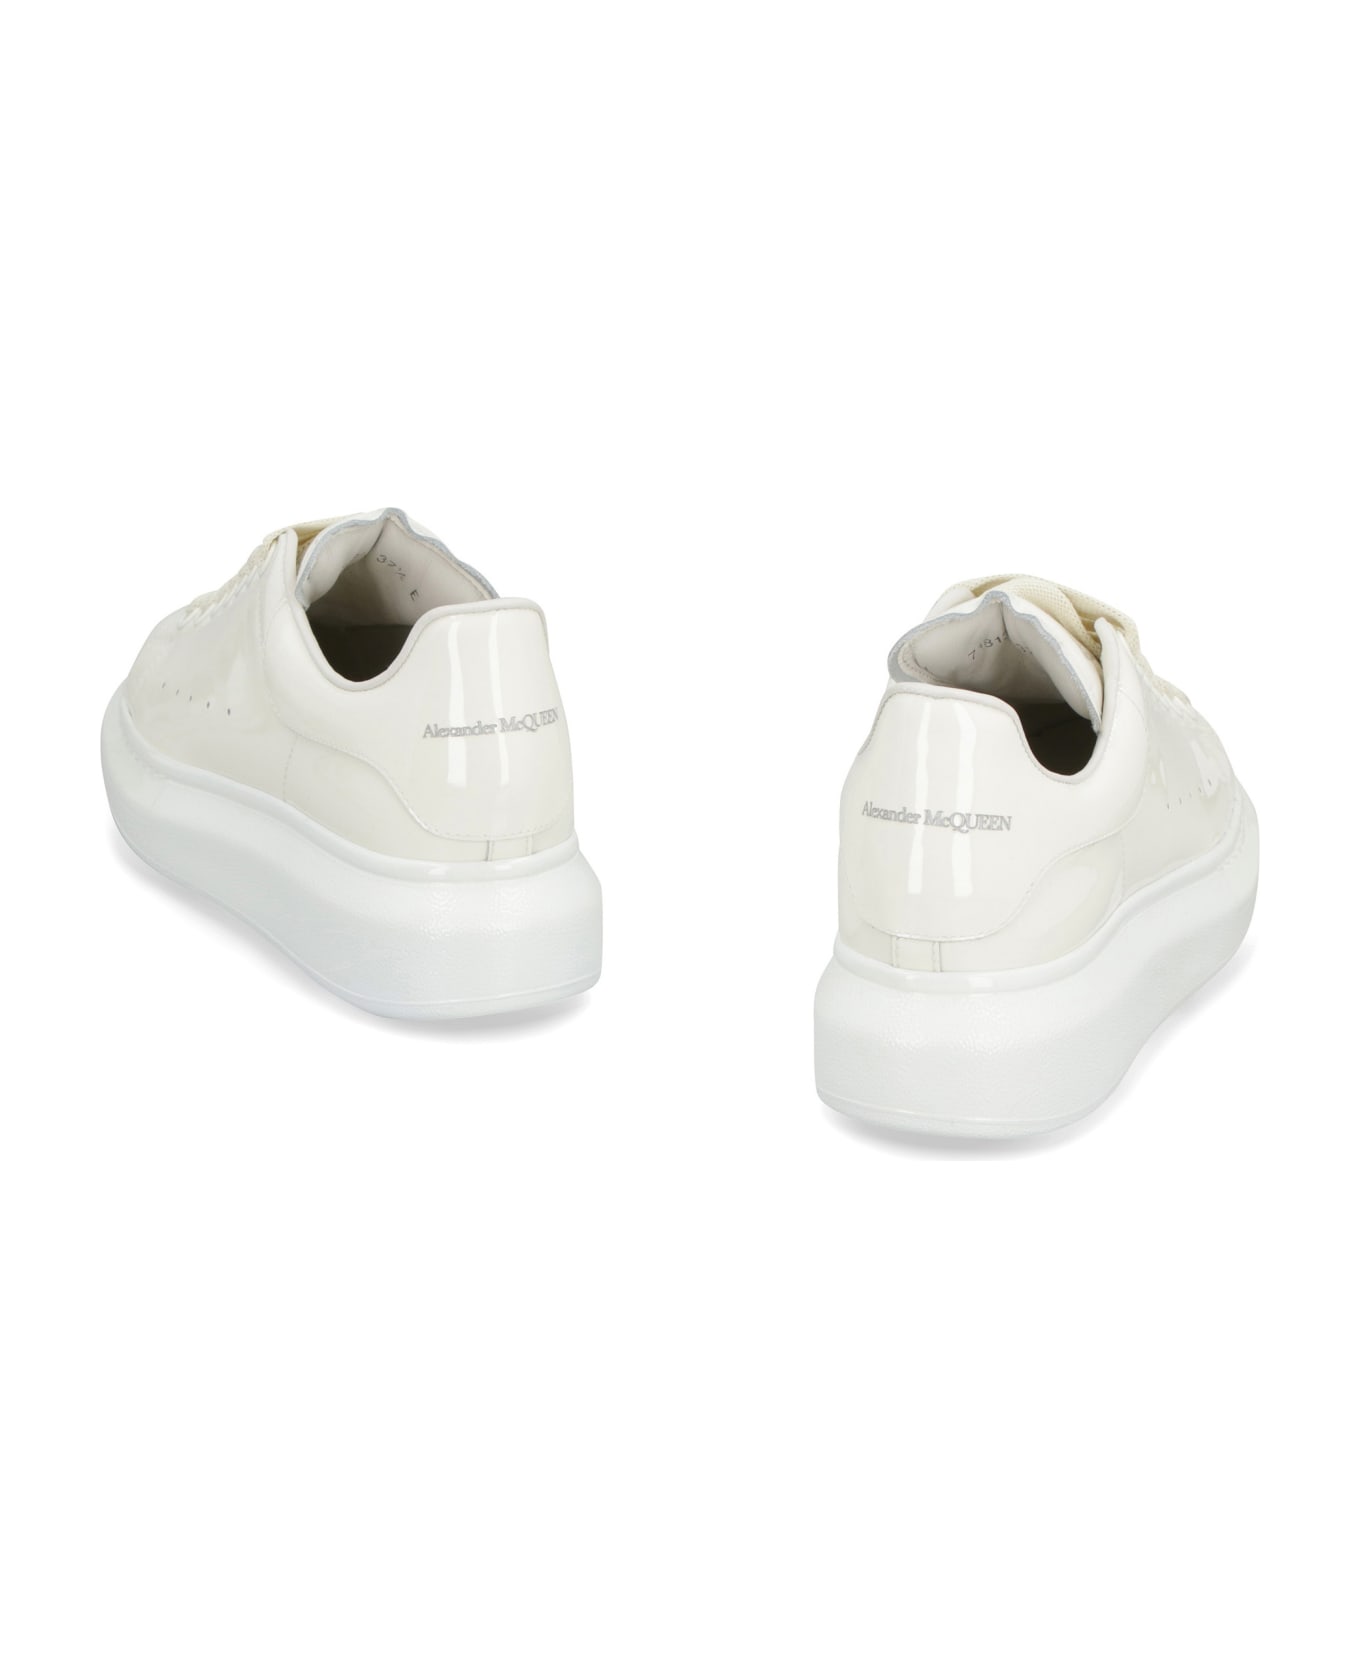 Alexander McQueen Larry Patent Leather Sneakers - White ウェッジシューズ